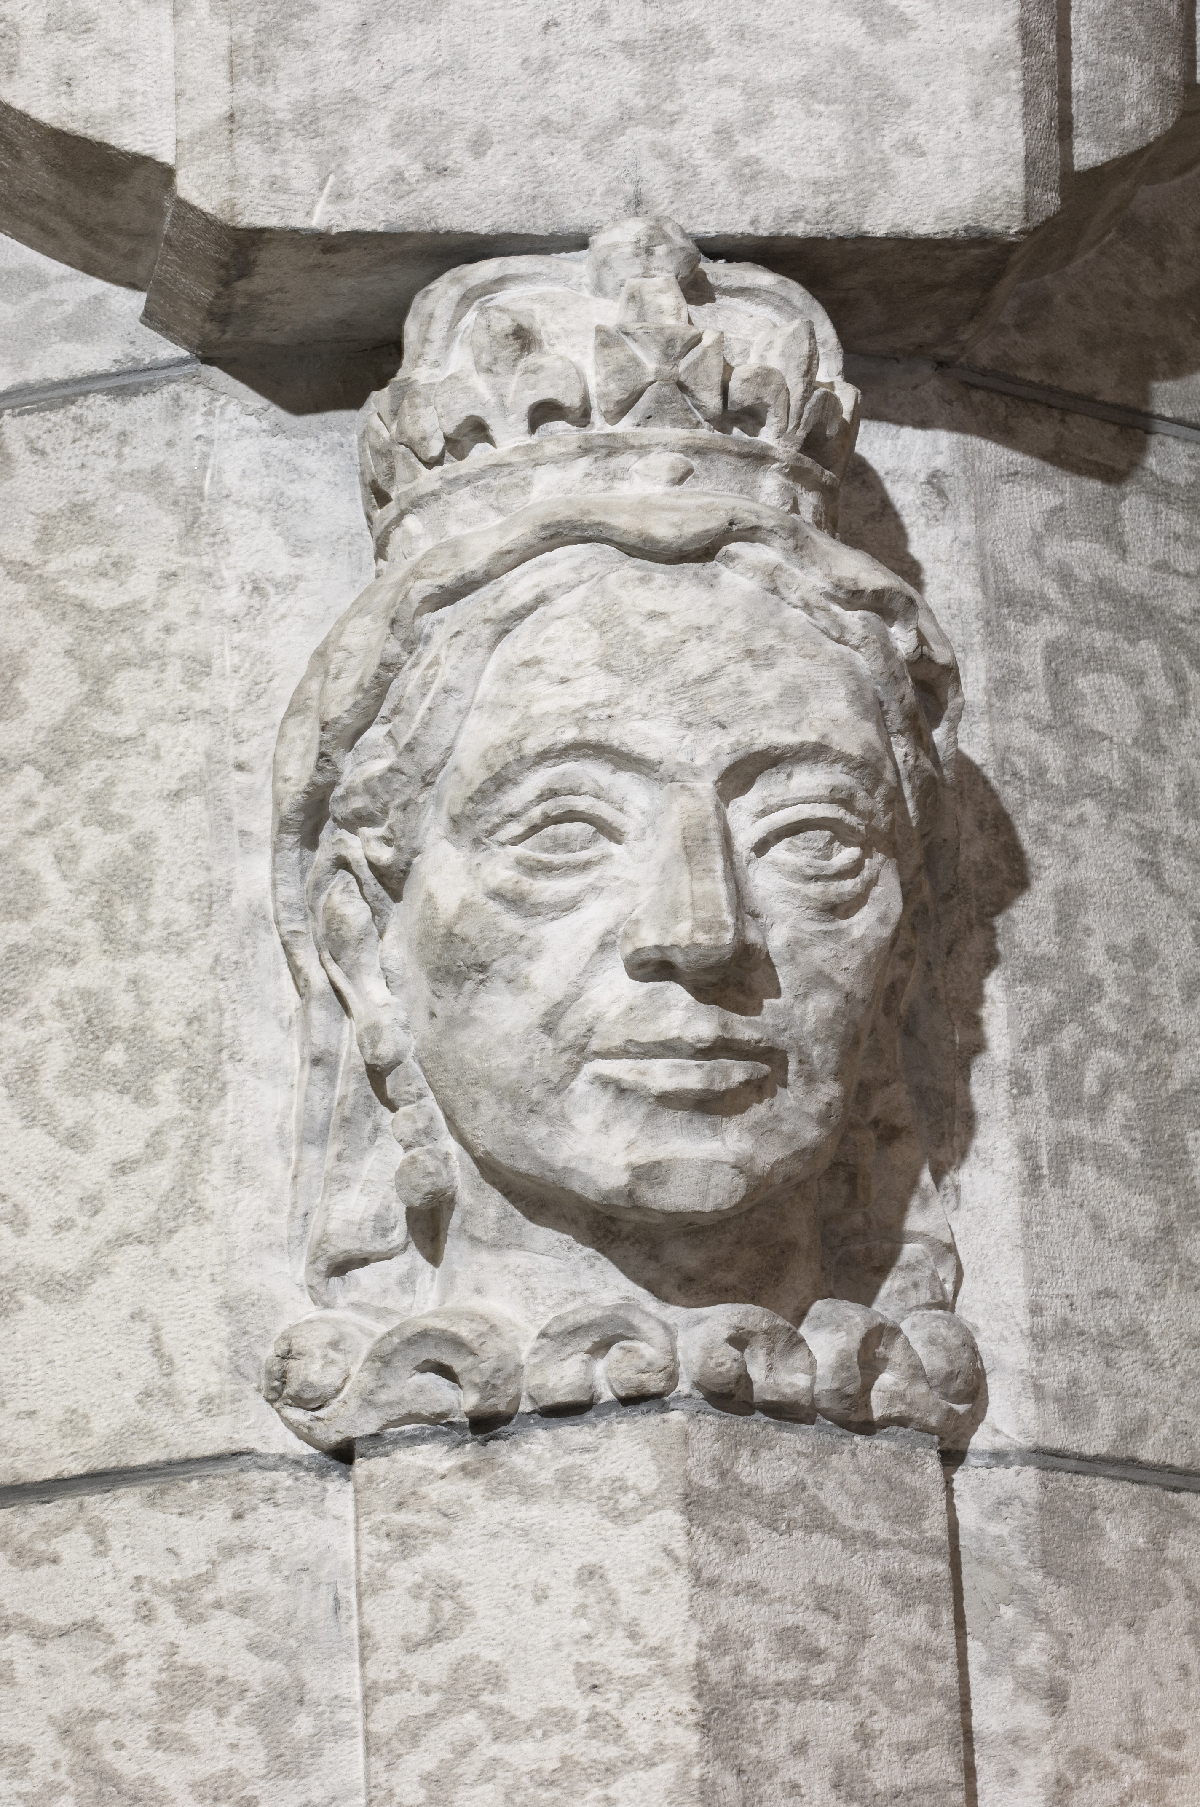 This limestone carving of Queen Victoria adorns a ledge on one of the columns flanking the entrance to the Senate antechamber.